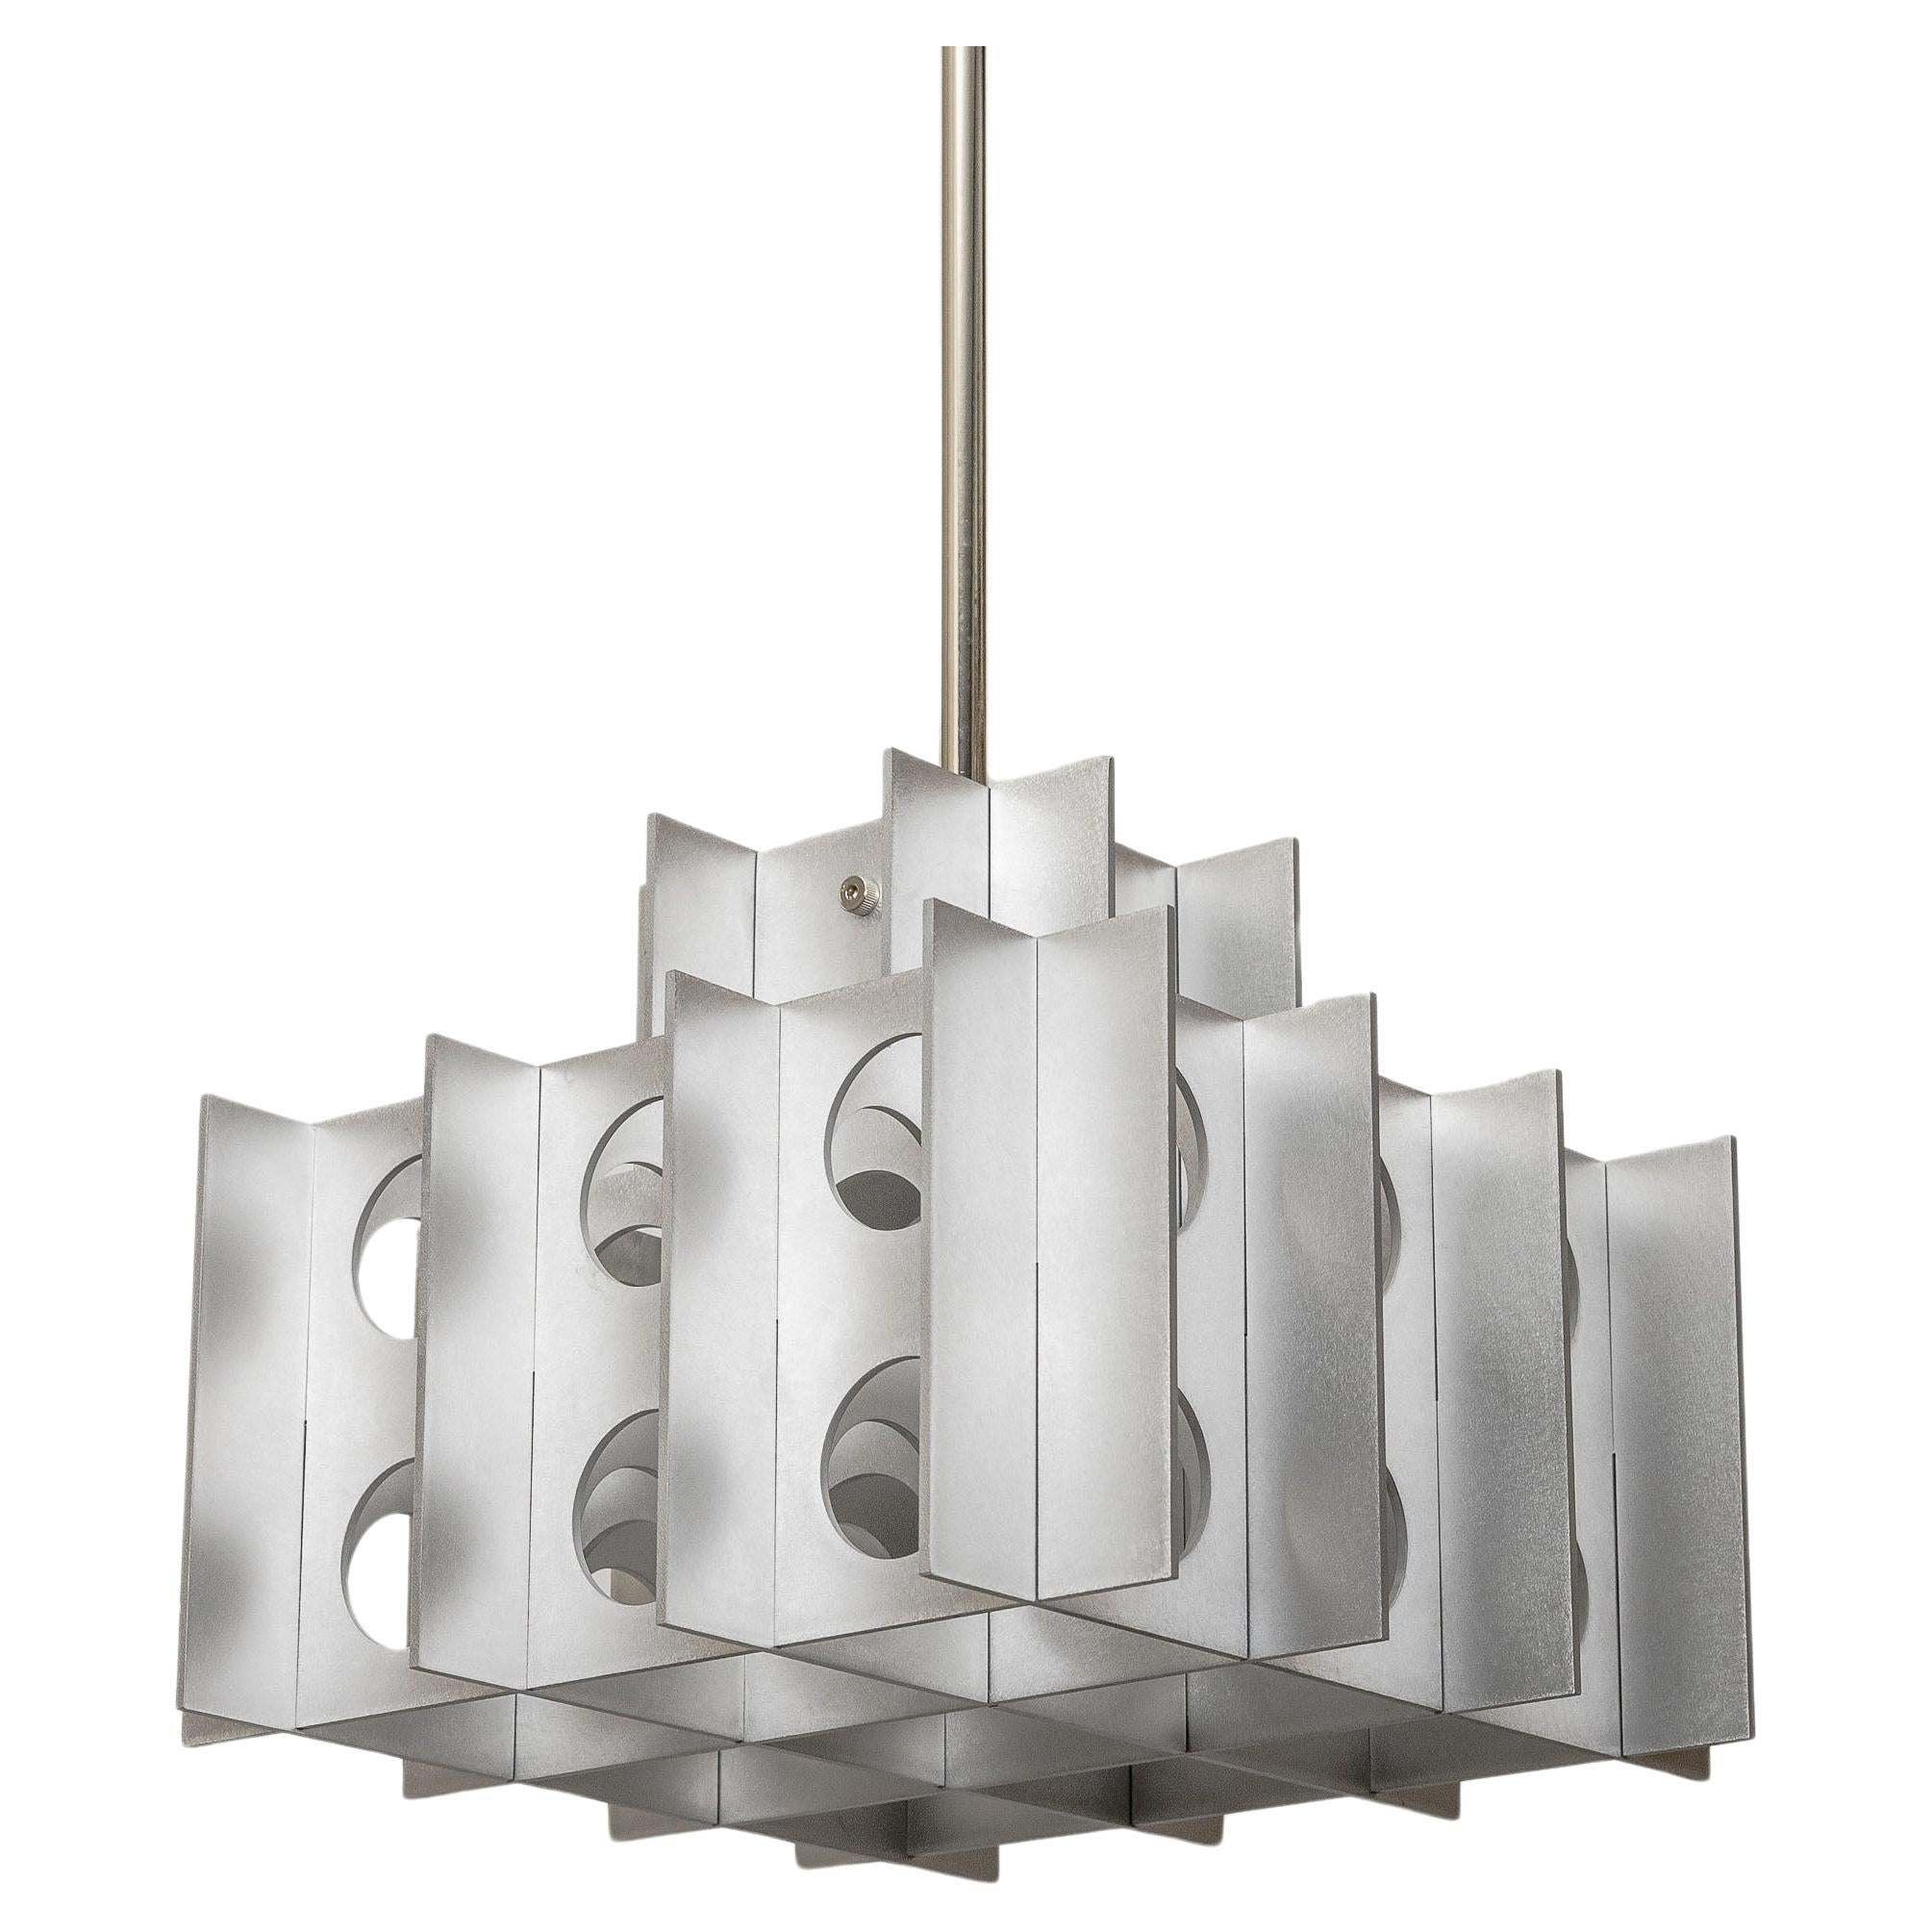 TENFOLD PENDANT 3TA 32inch by Luft Tanaka Studio

Composed of interlocking sheet metal panels, the Tenfold Series is inspired by brutalism and the 1970's architectural style. The light fixture works well as a single fixture over a dining table